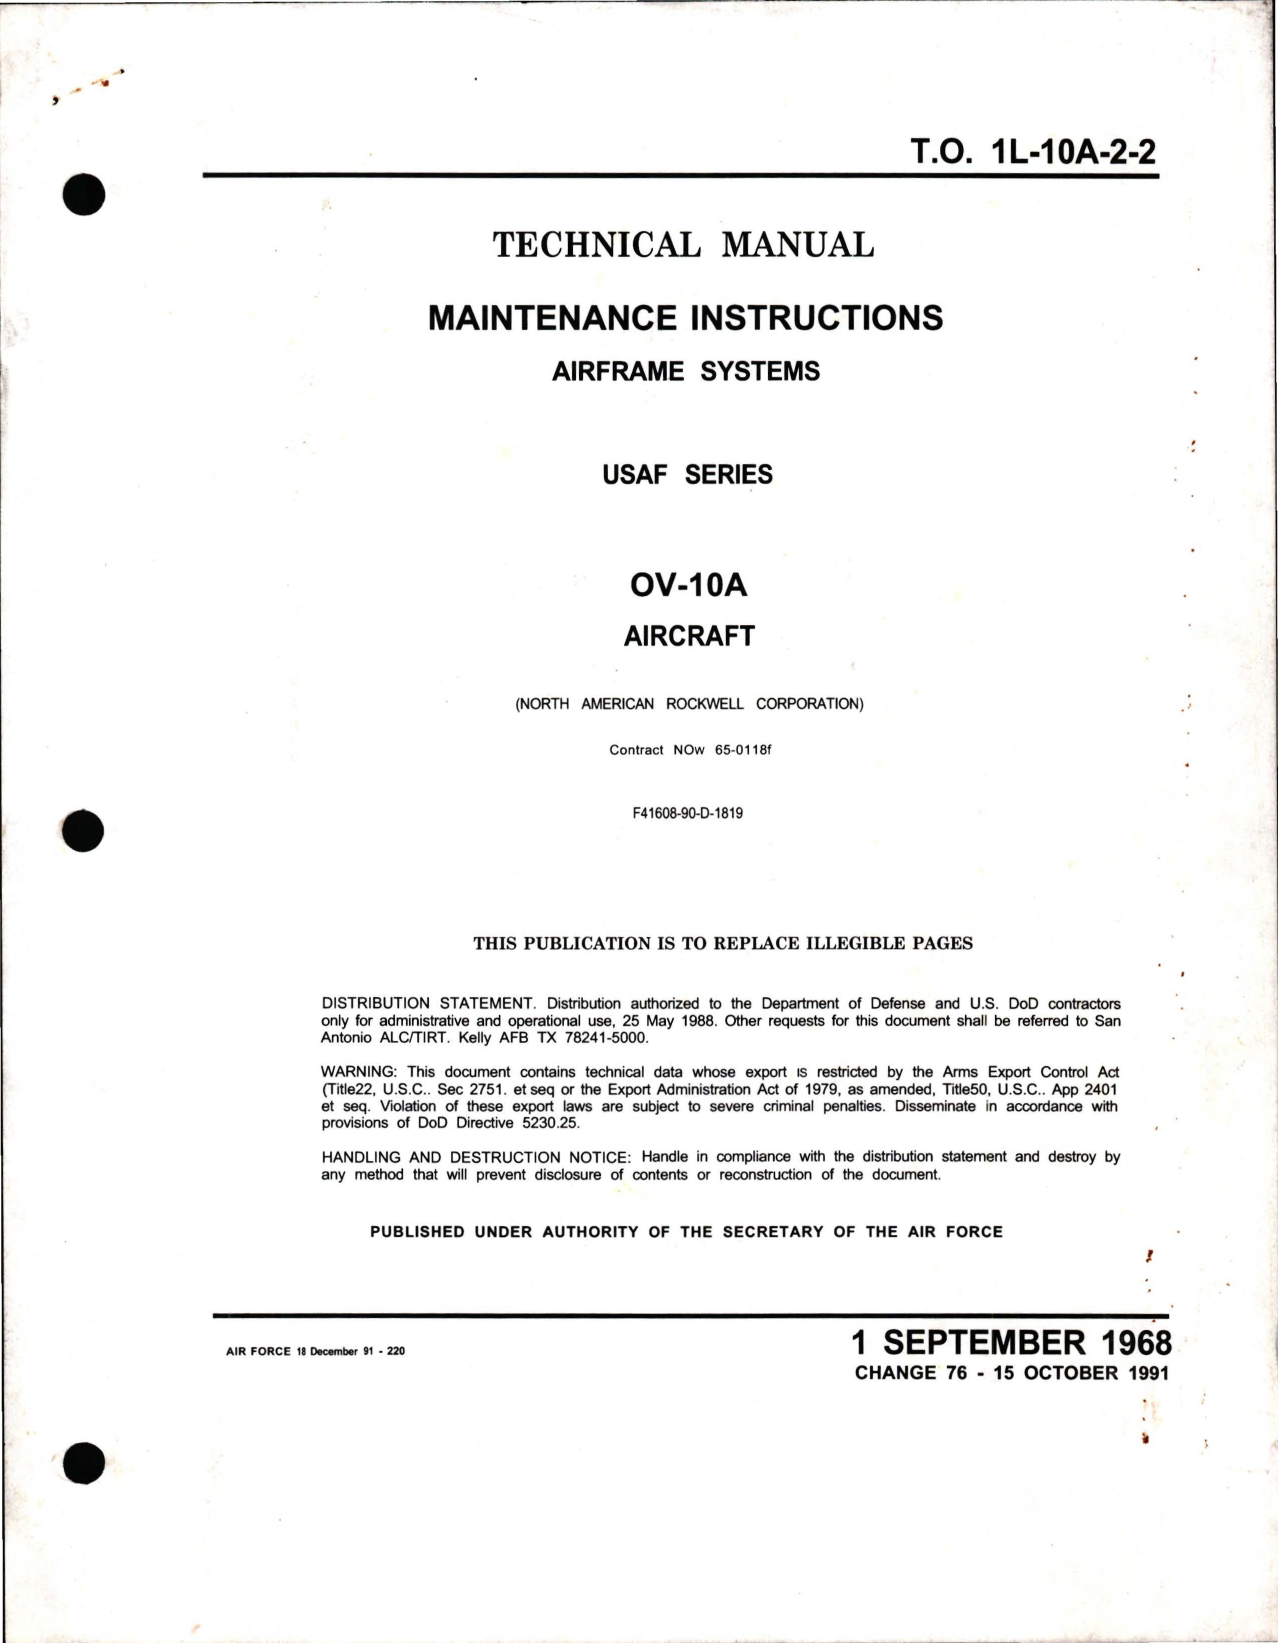 Sample page 1 from AirCorps Library document: Maintenance Instructions for Airframe Systems on OV-10A